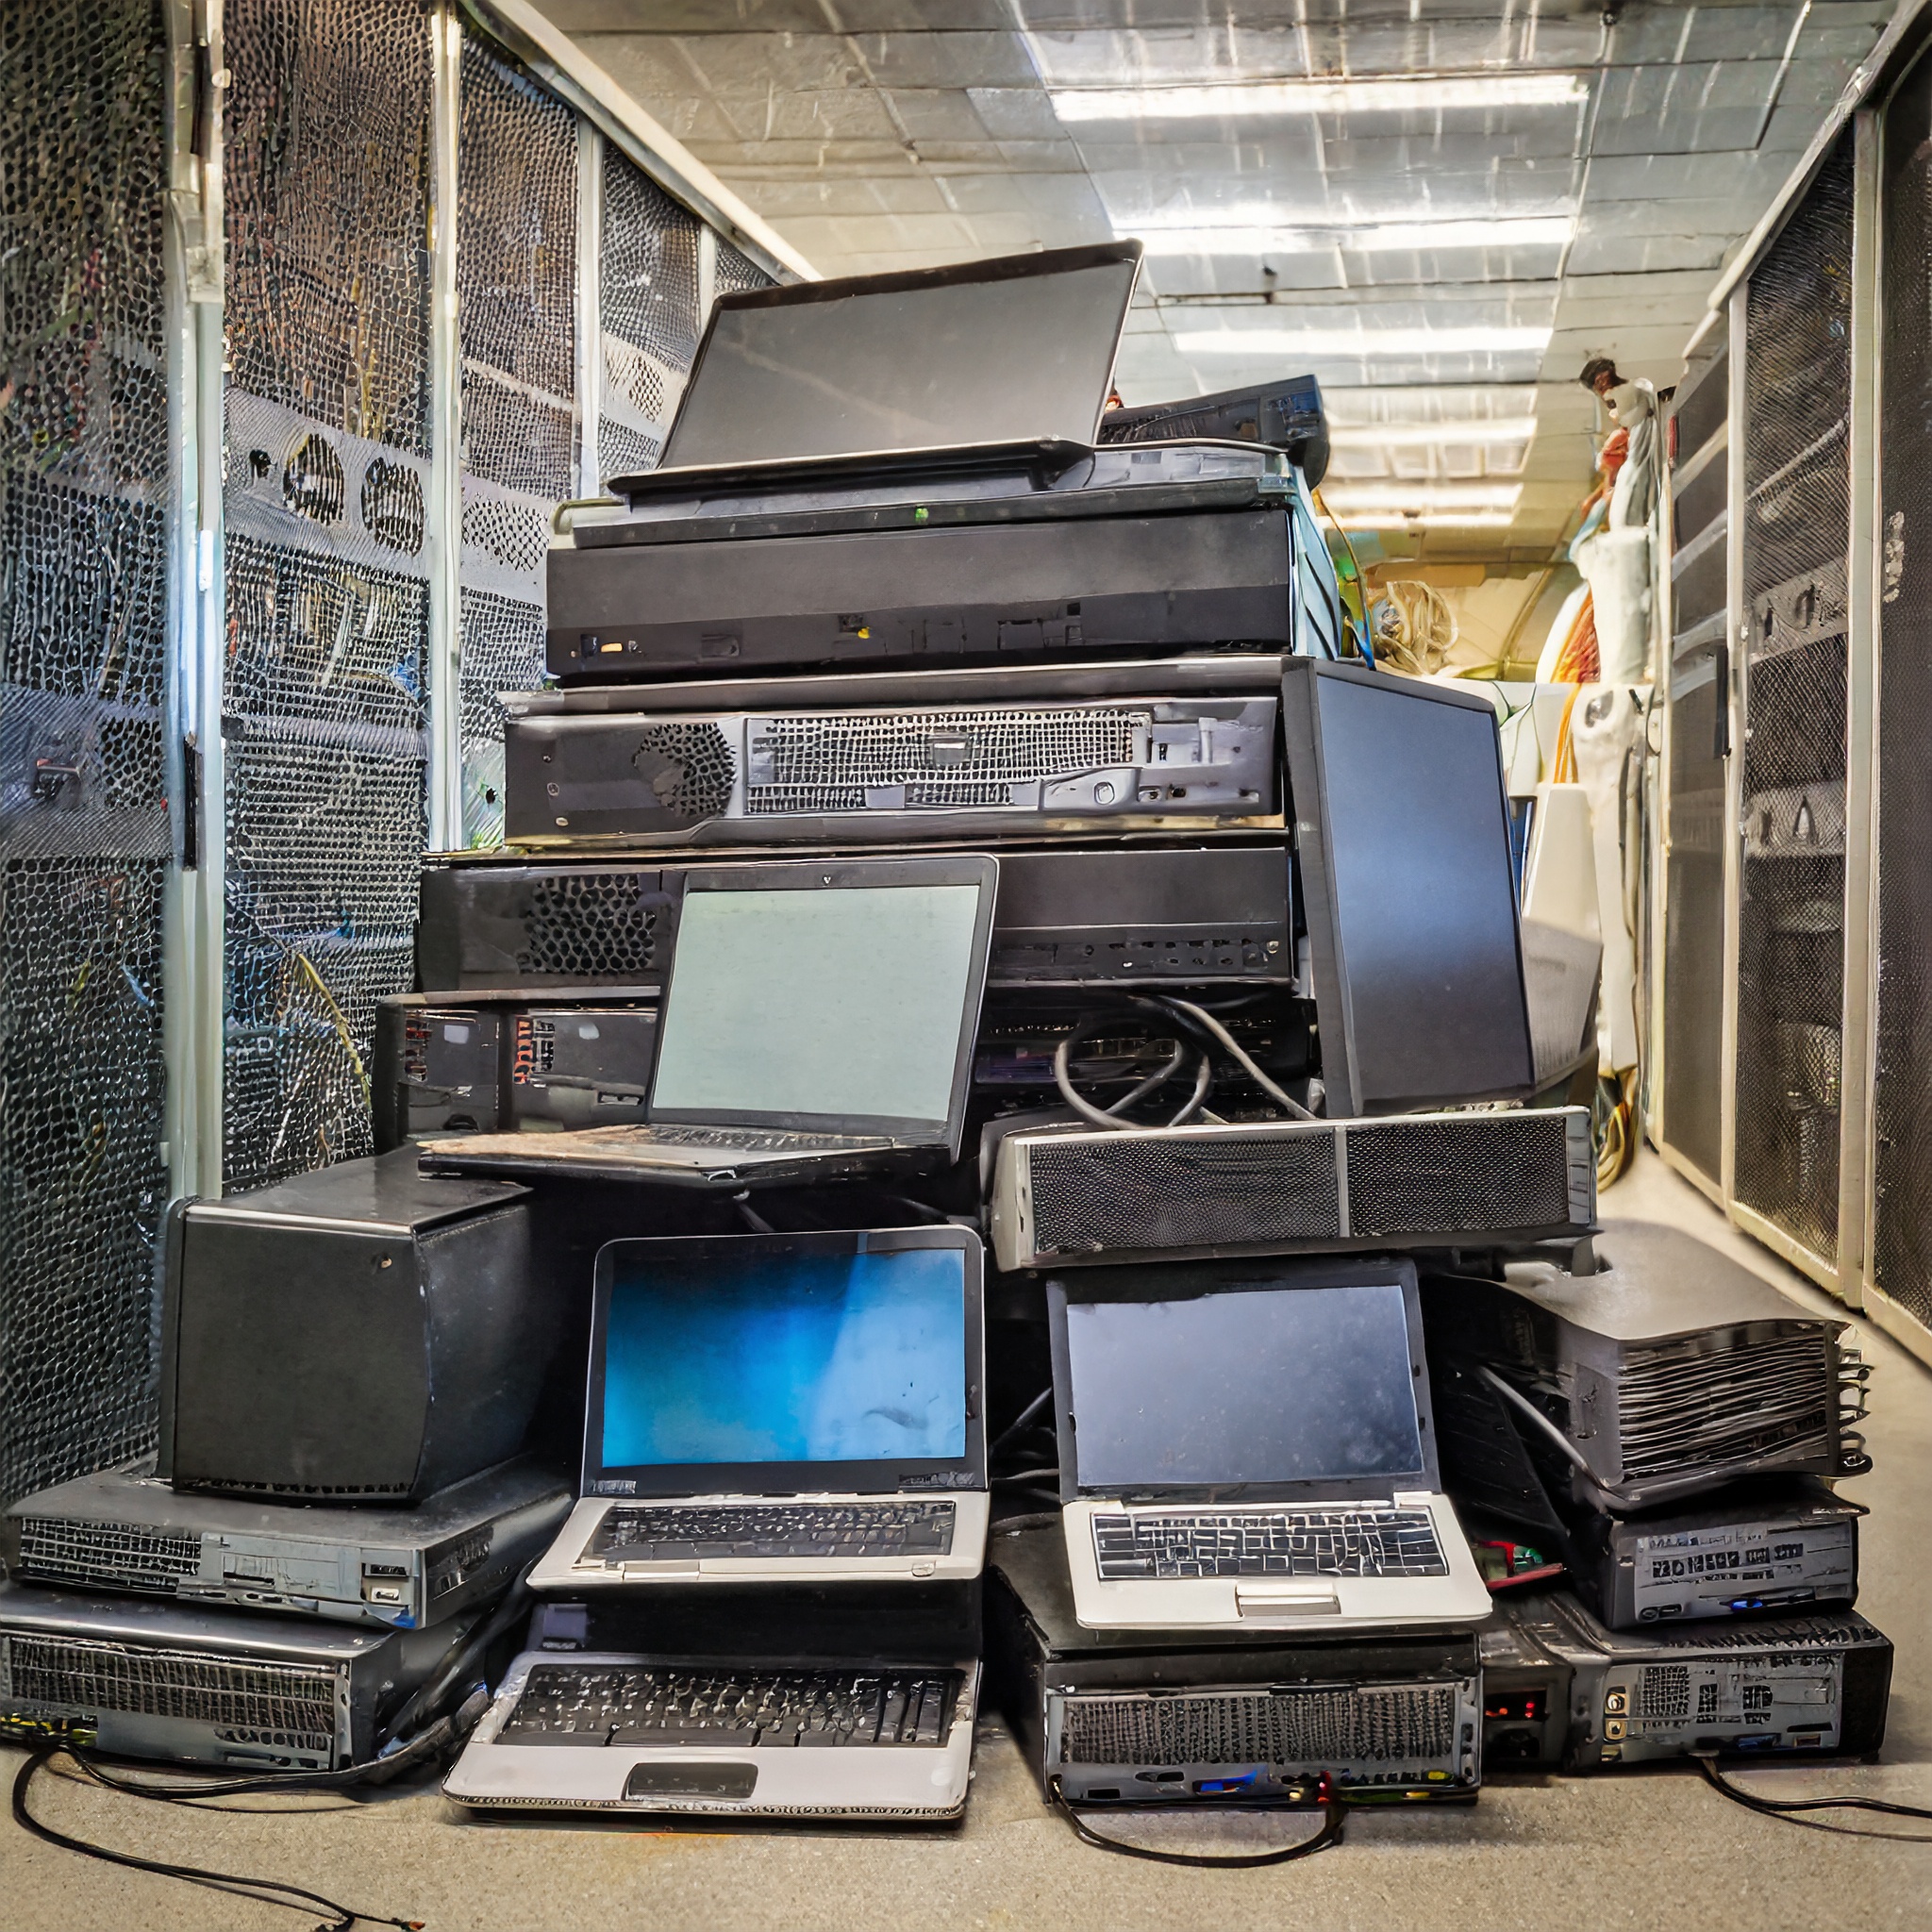 pile of old IT equipment